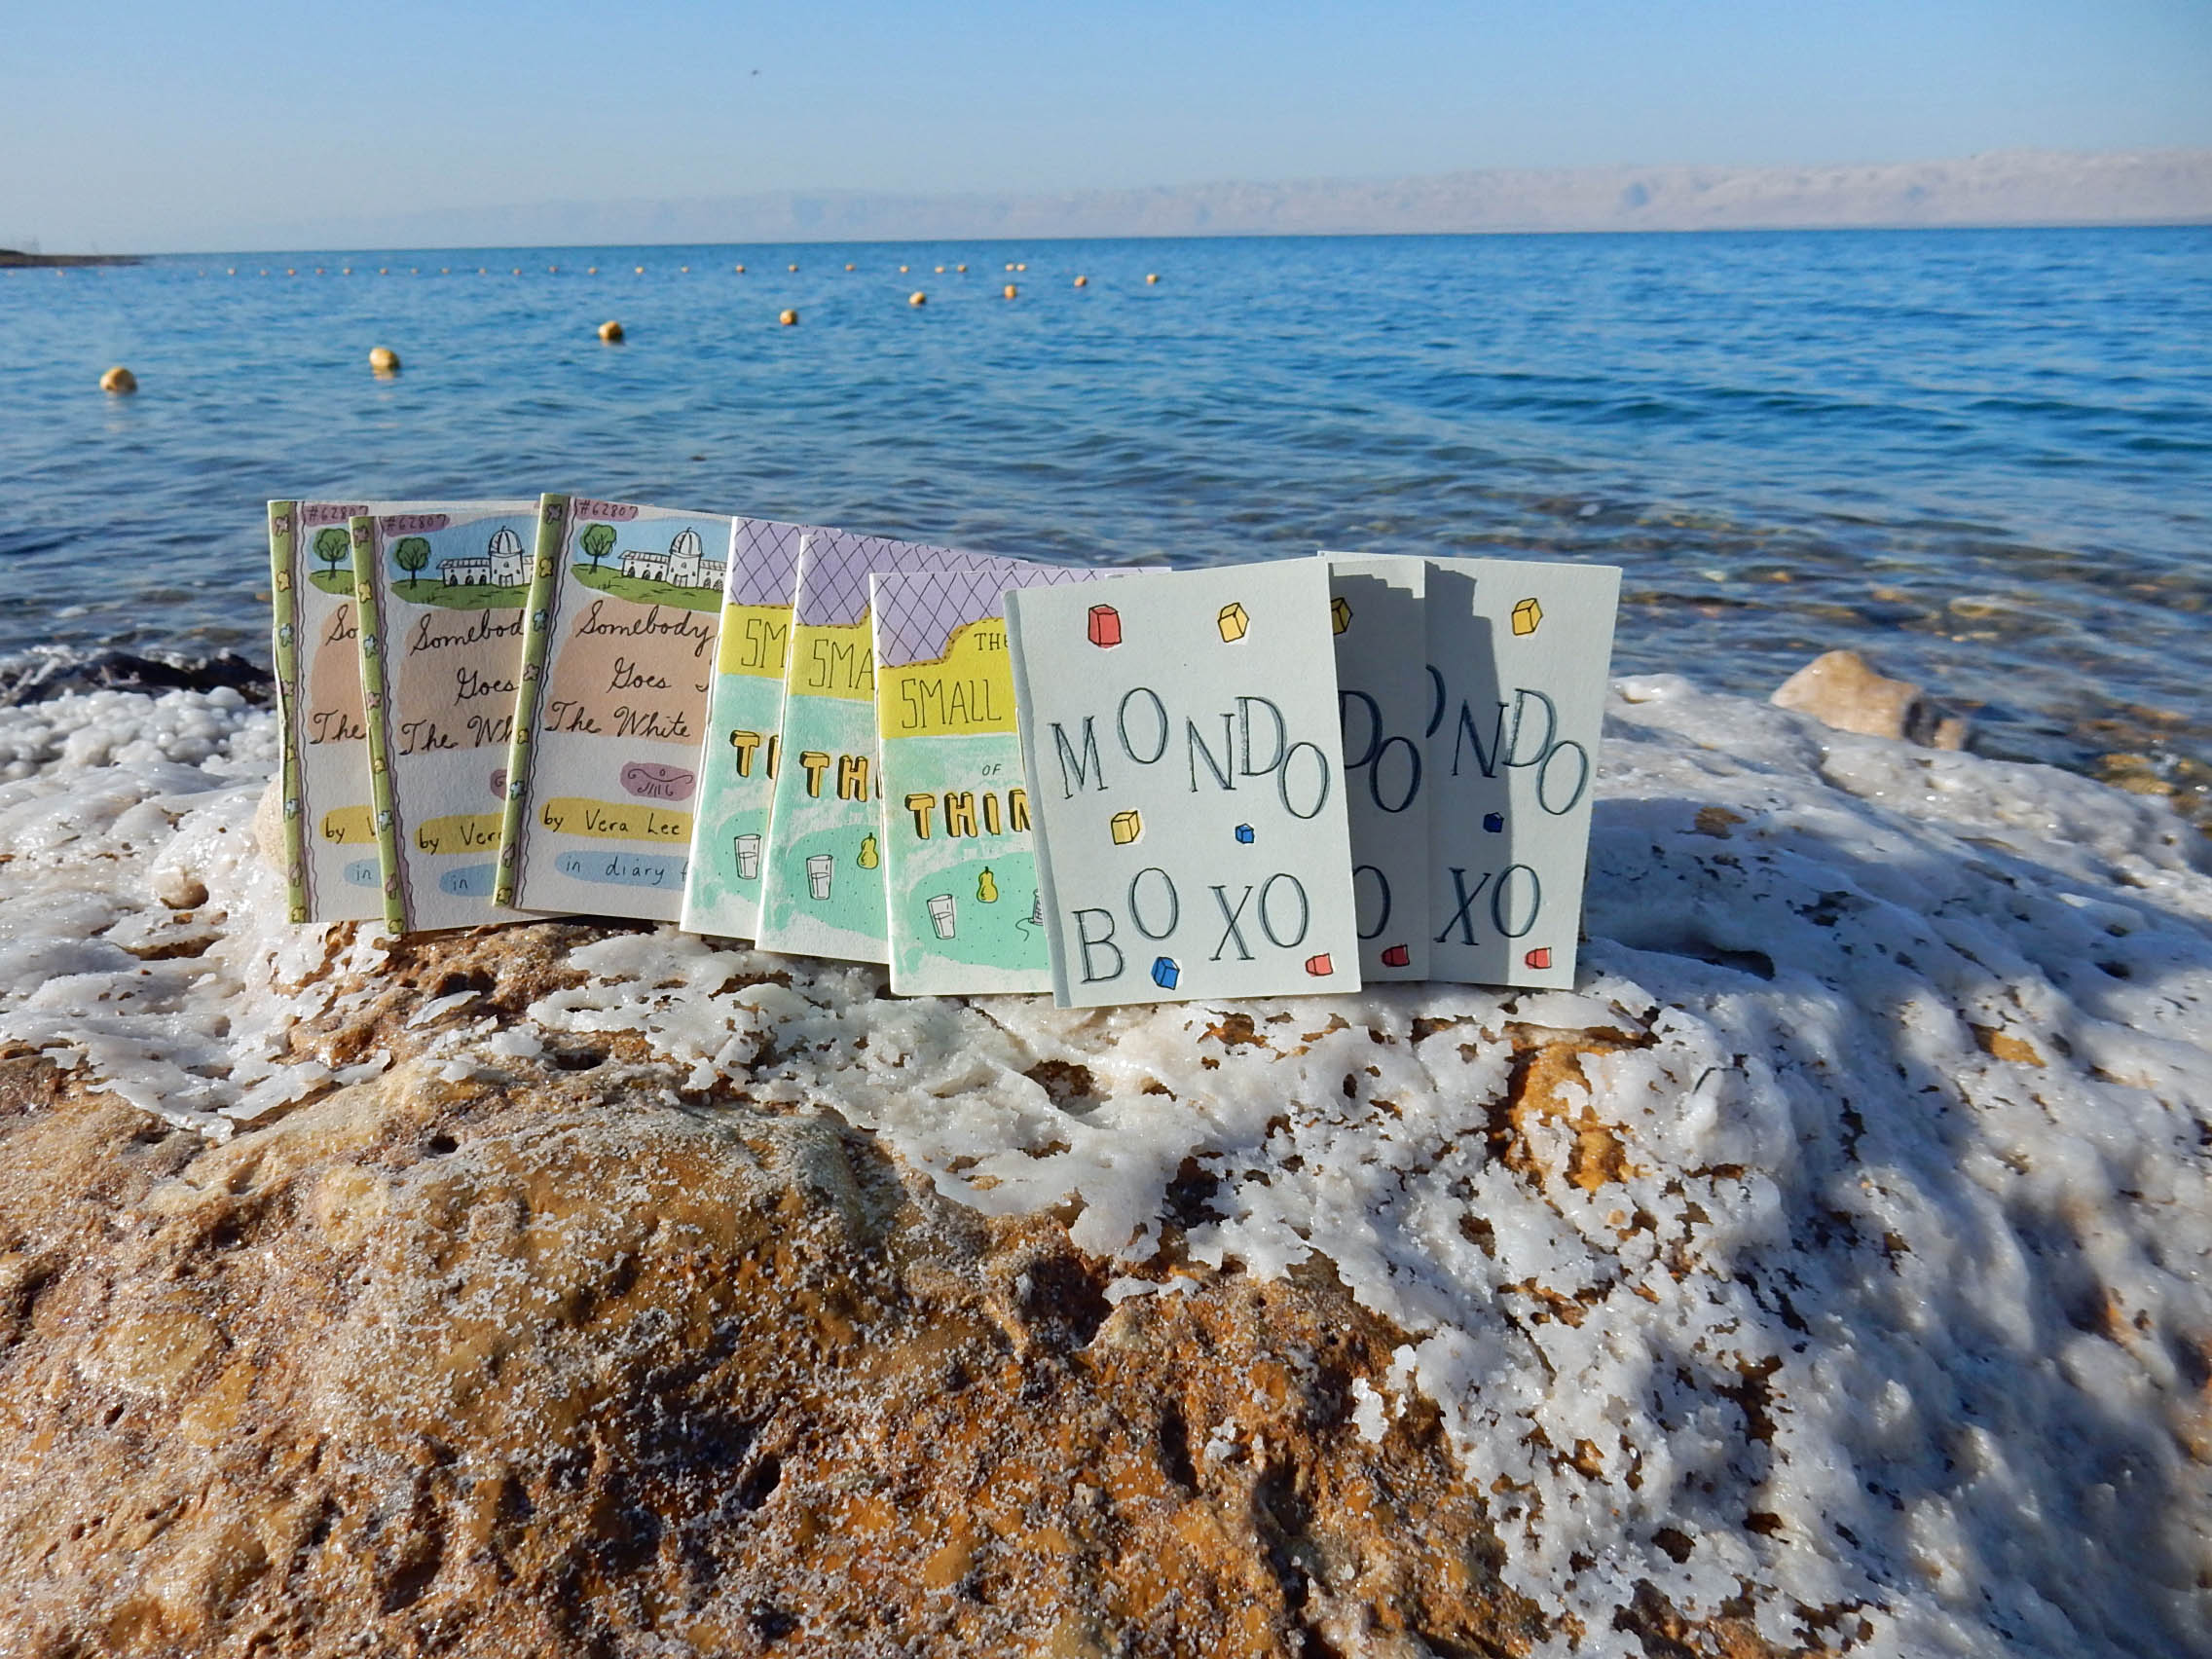 Three Small Books visit the Dead Sea and are joined by Six Other Small Books in November of 2015